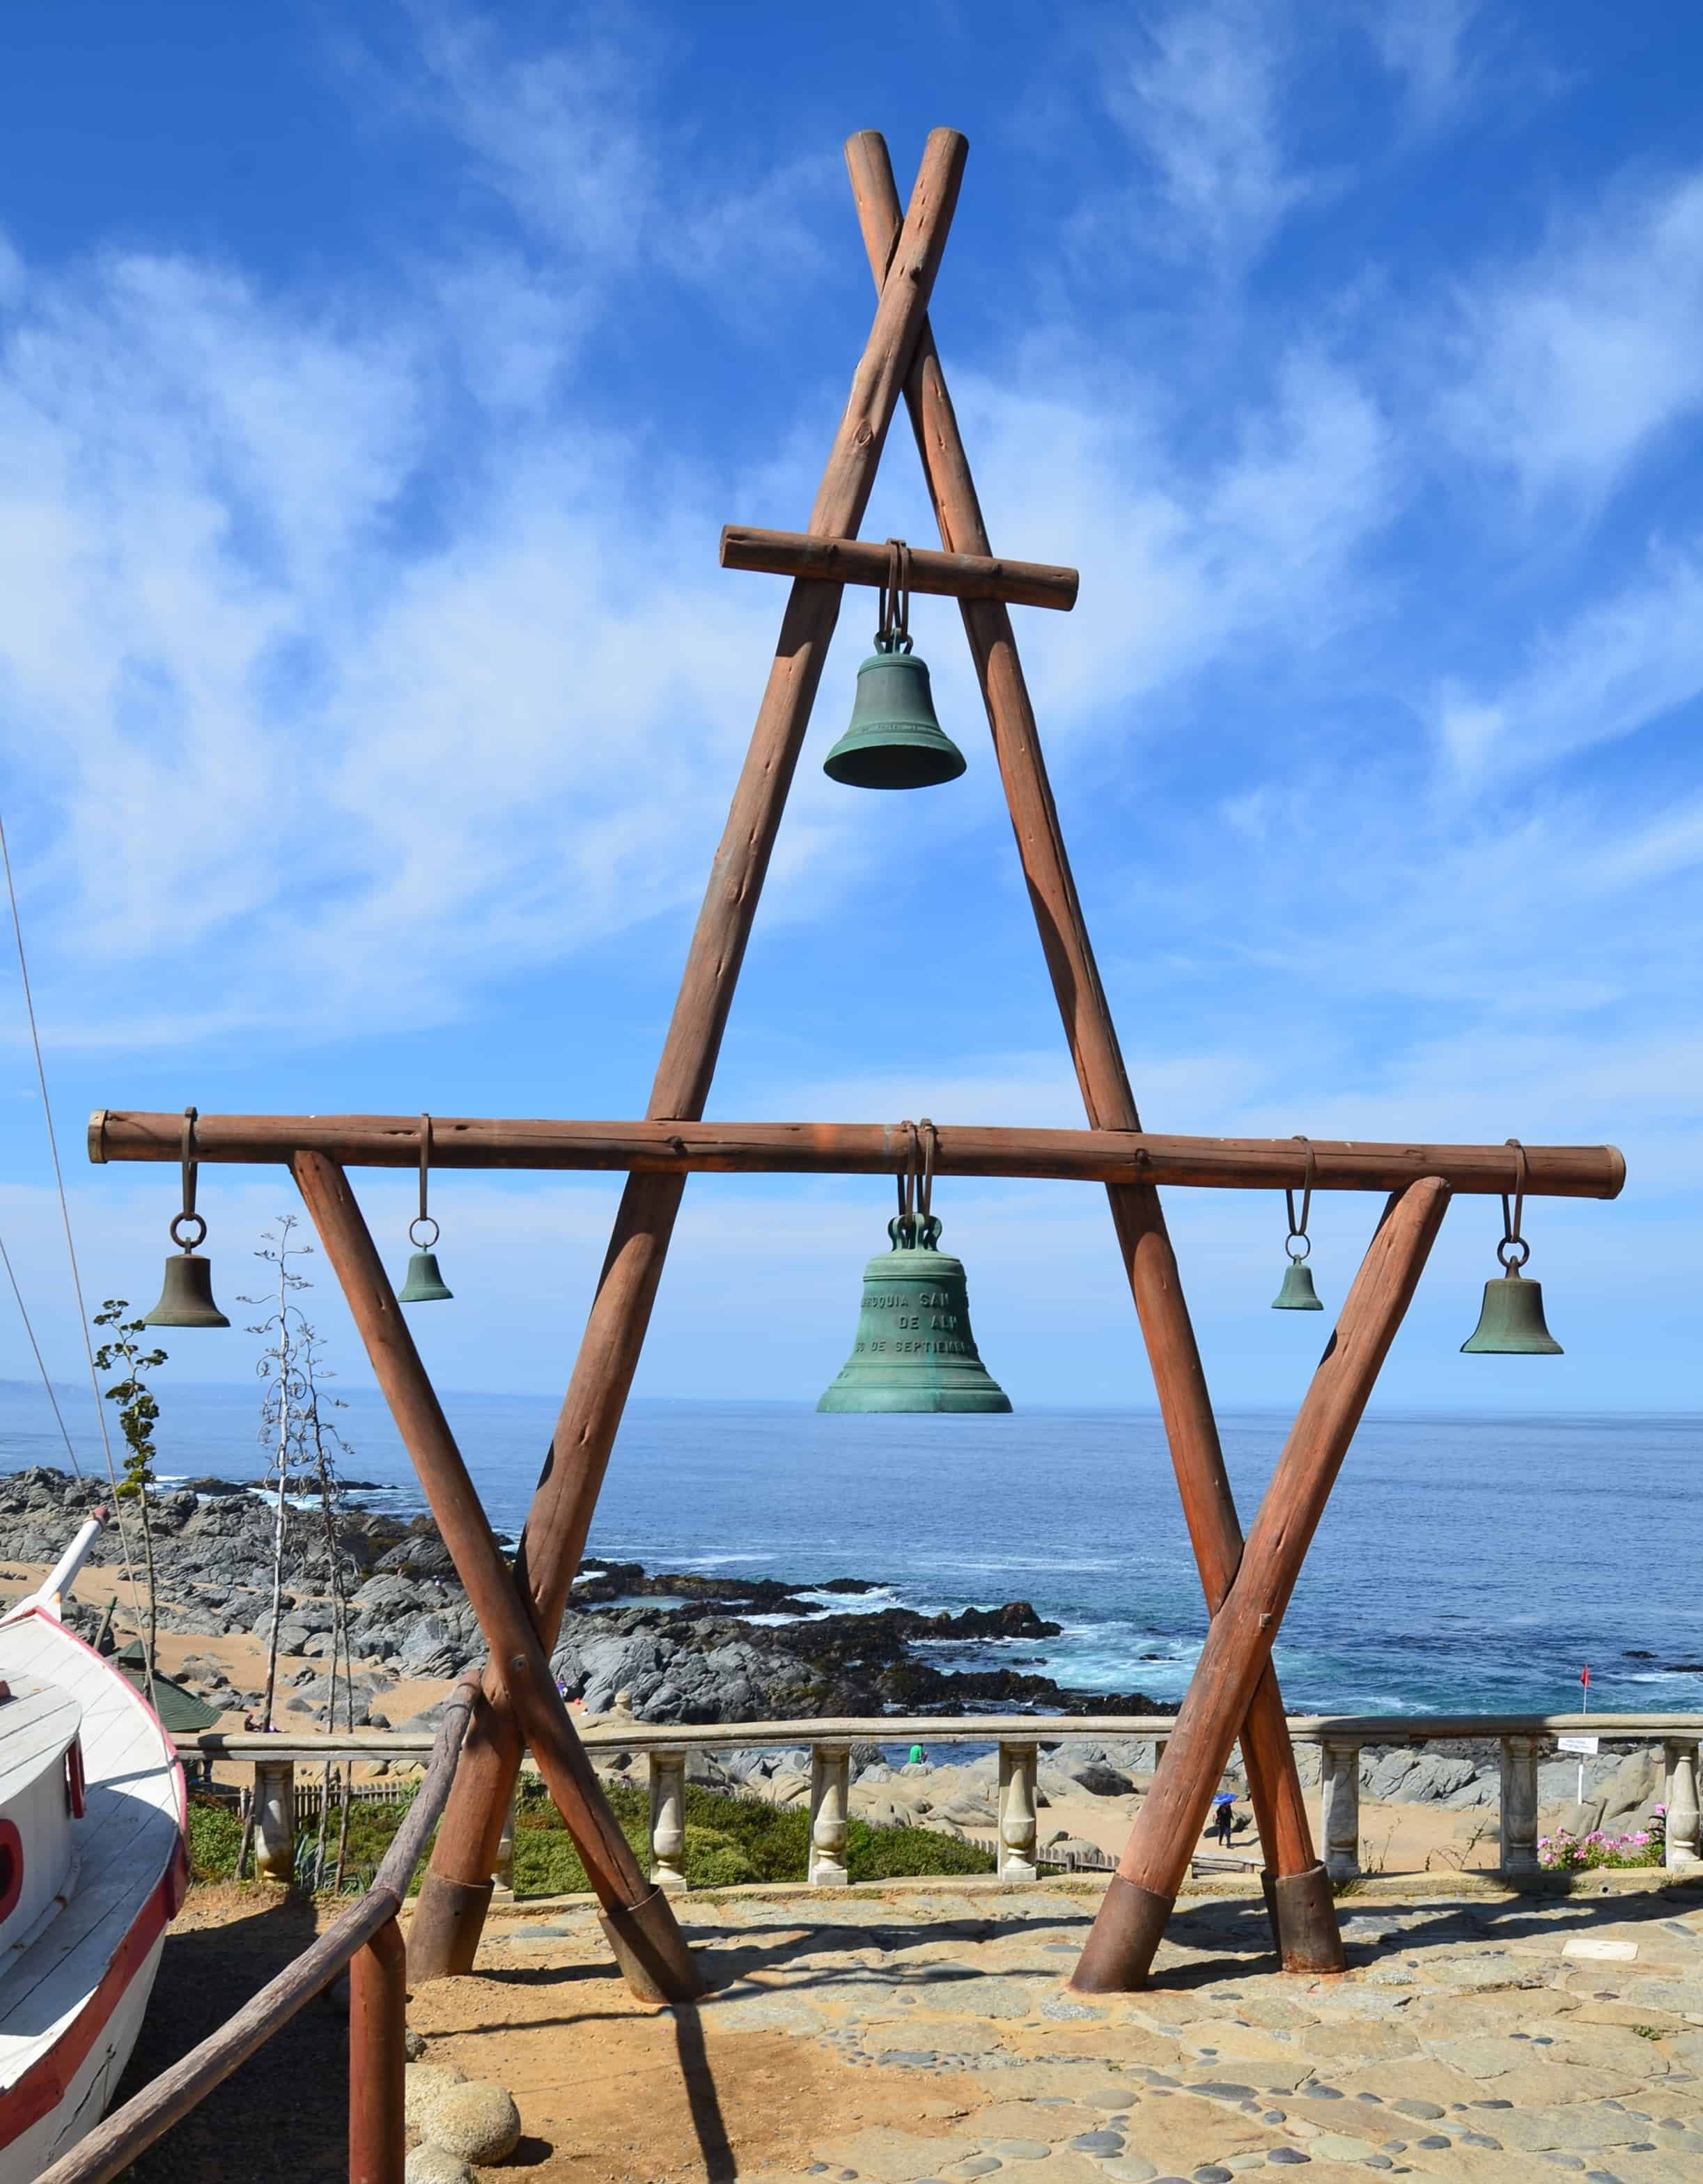 Bell tower at Isla Negra, Chile